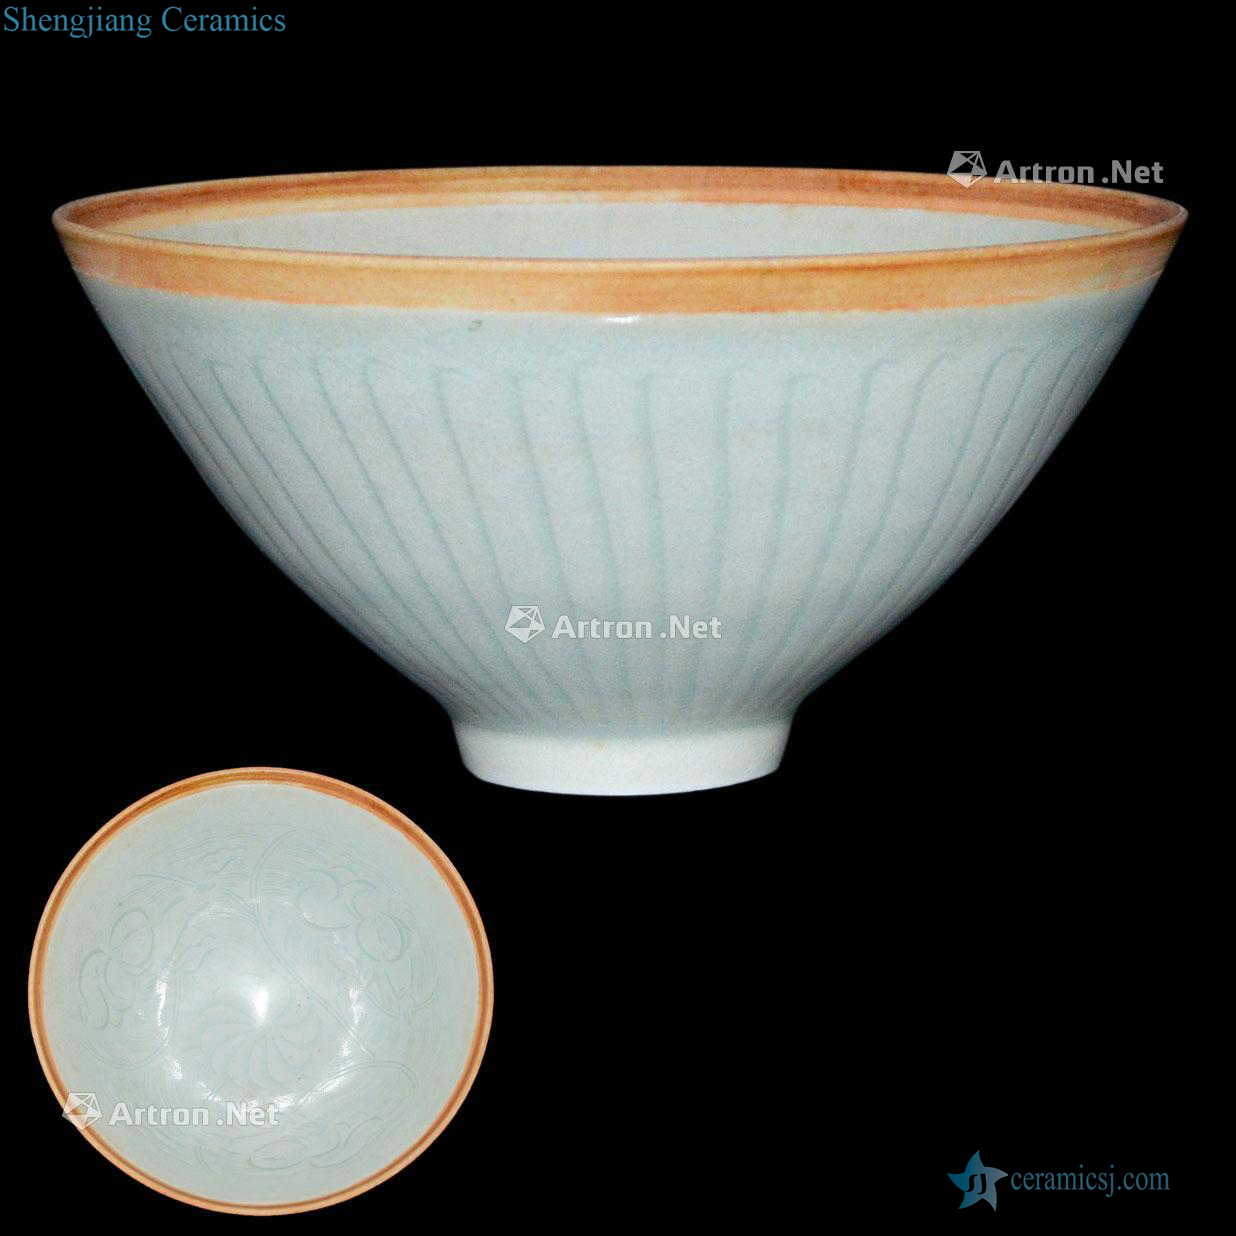 The song kiln mouth cut chrysanthemum petals YingXiWen difference was the dishes